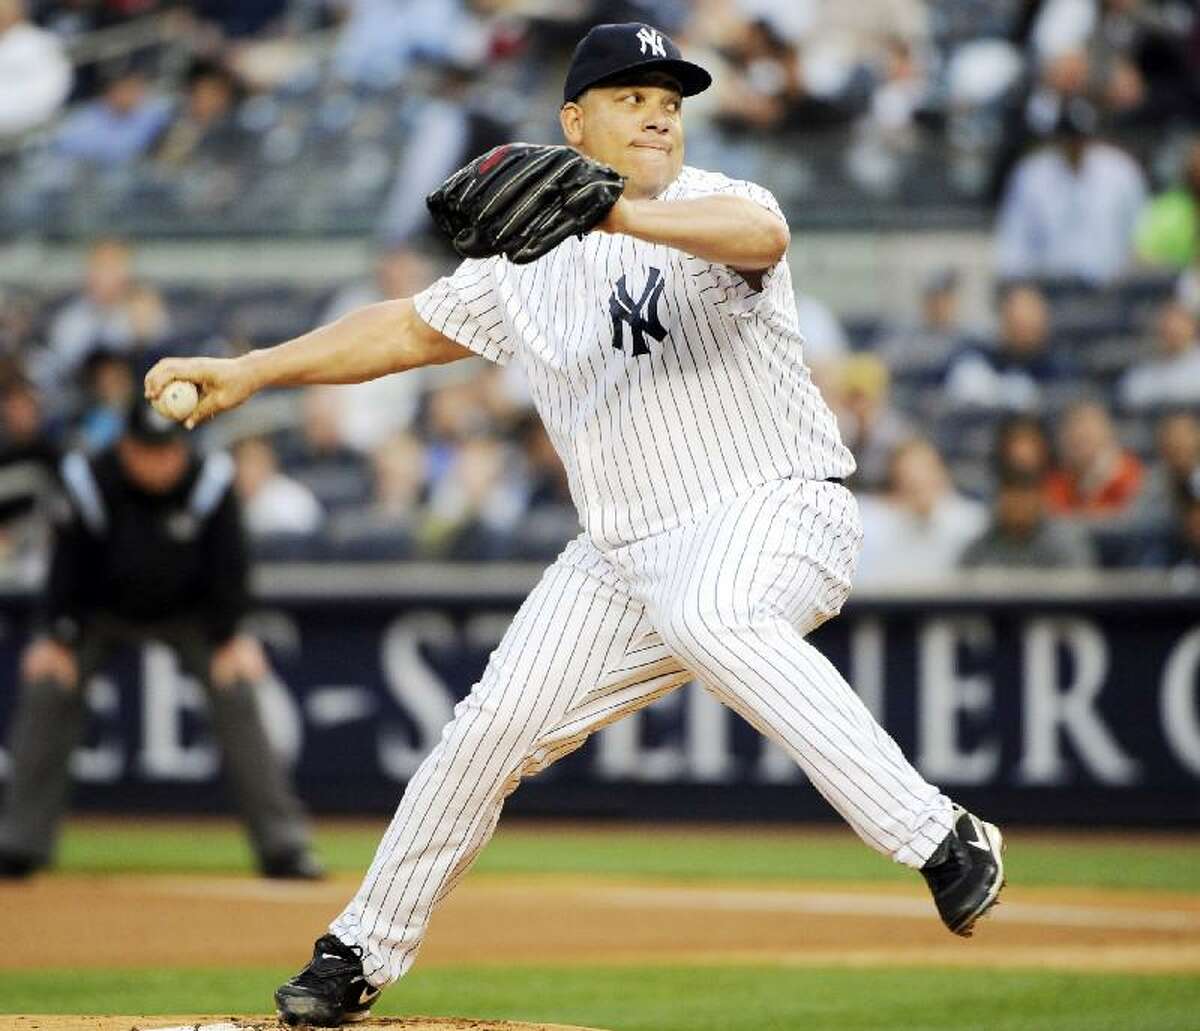 ASSOCIATED PRESS New York Yankees pitcher Bartolo Colon delivers the ball to the Chicago White Sox during the first inning of Wednesday's game at Yankee Stadium in New York. Colon got the win as the Yankees defeated the White Sox 3-1.